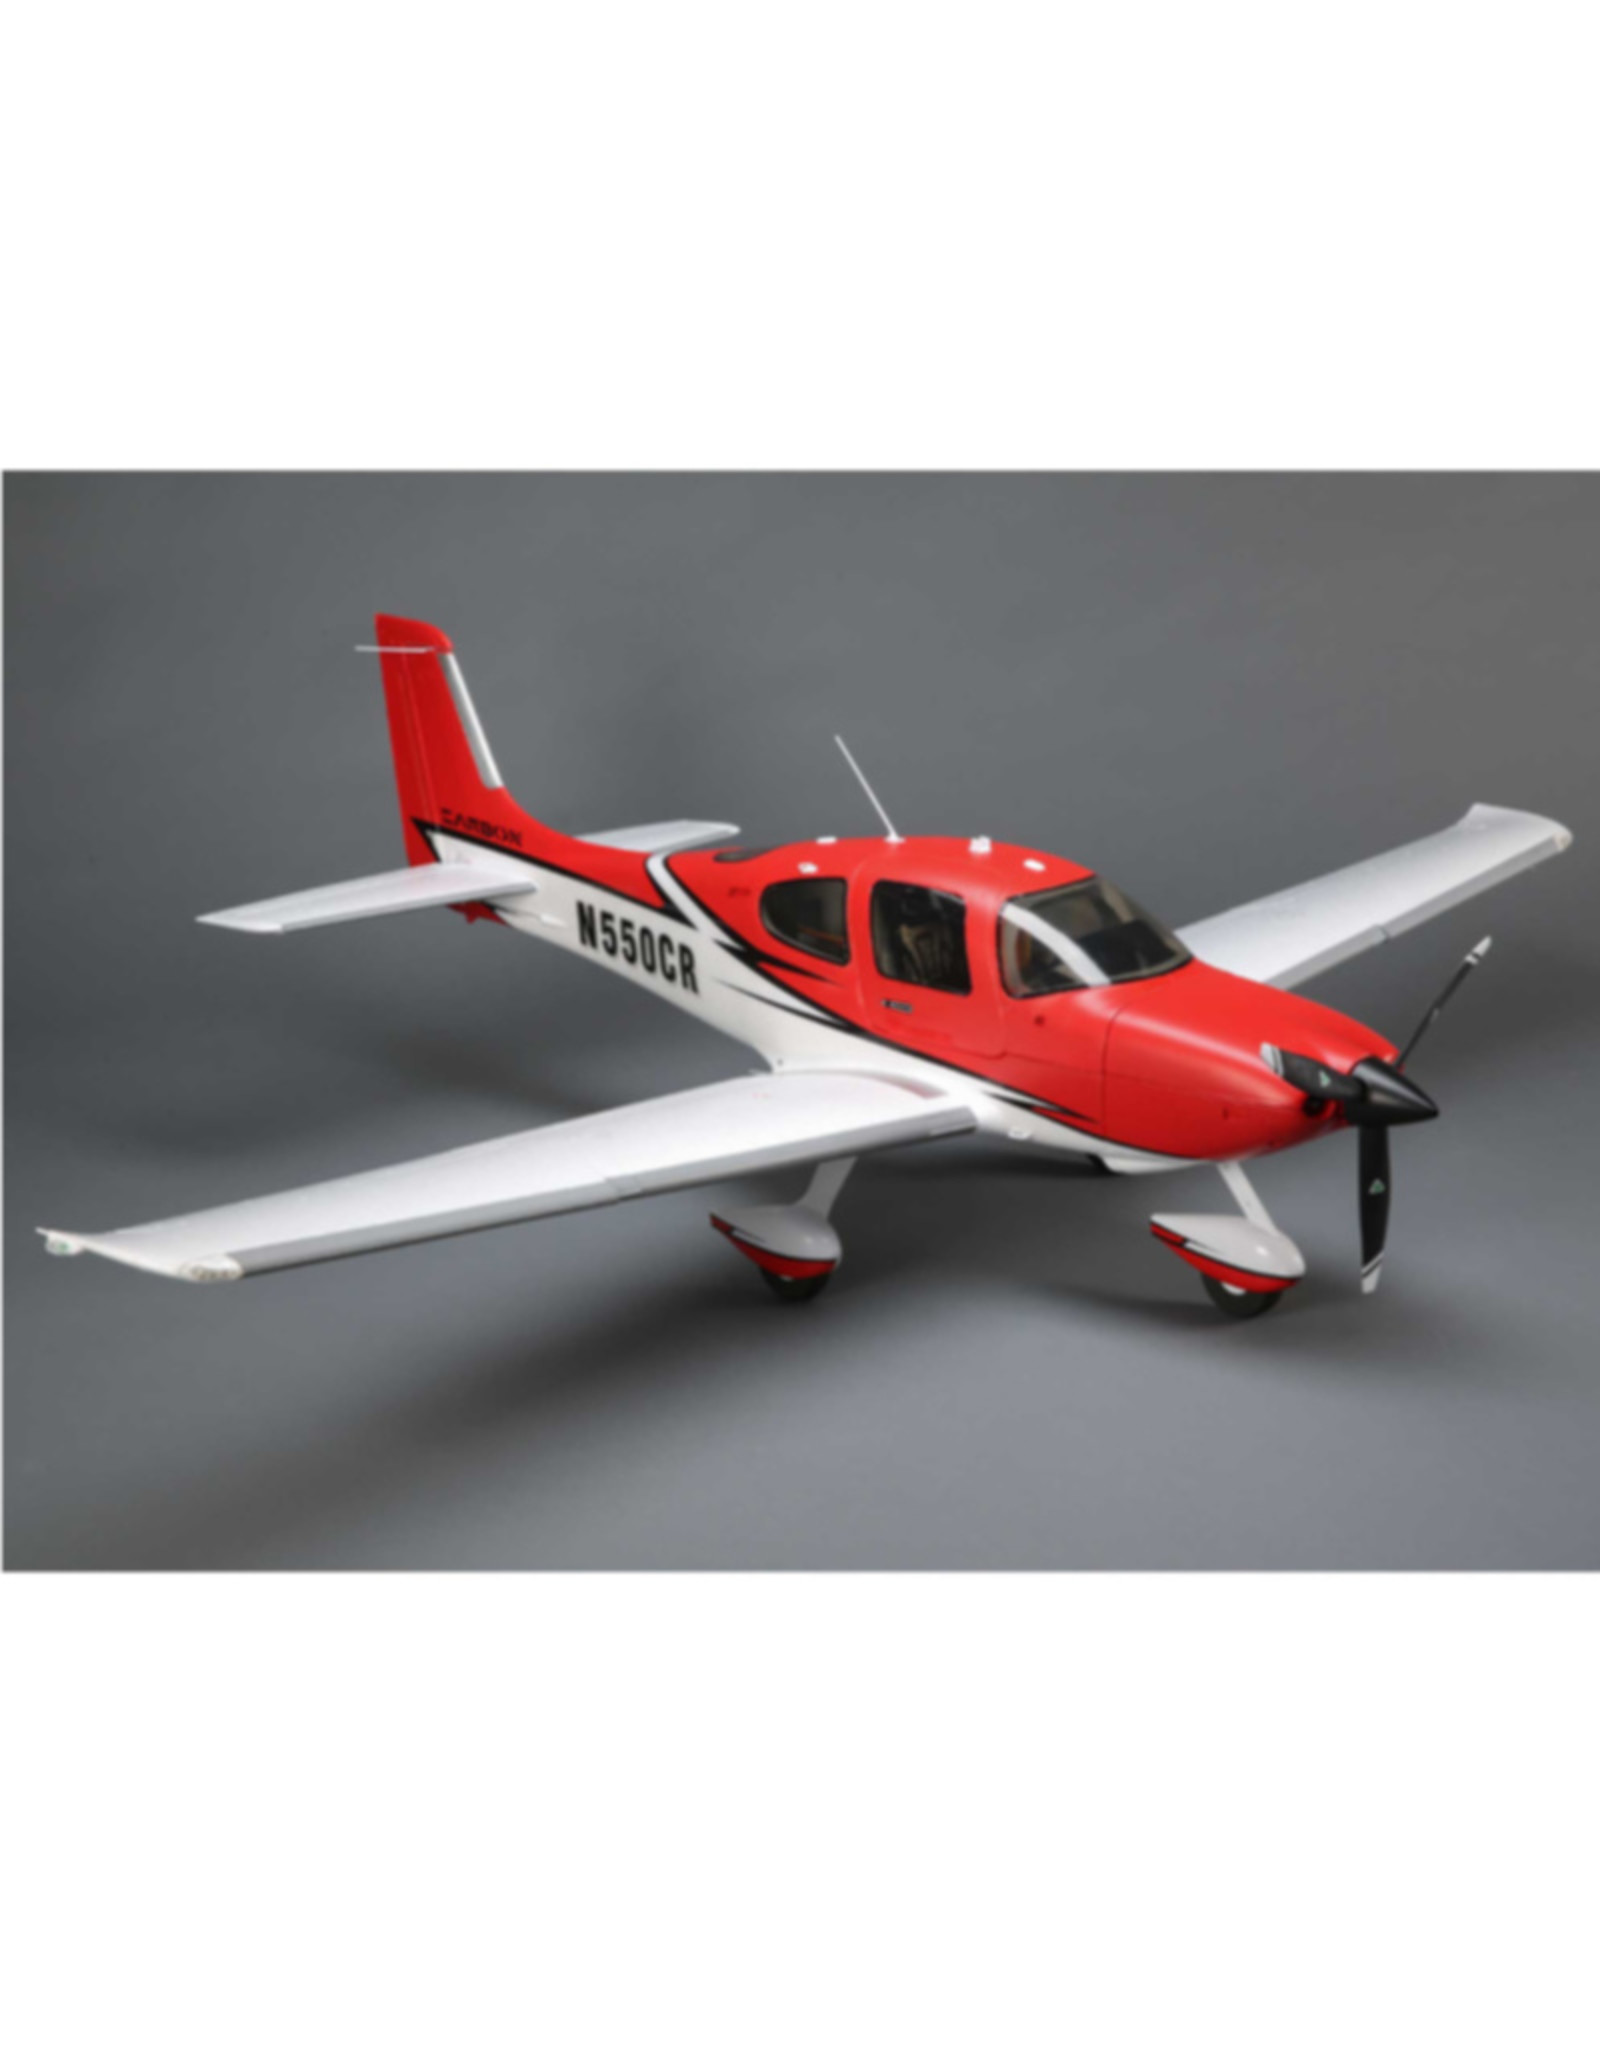 eflite EFL15950 Cirrus SR22T 1.5m BNF Basic with Smart, AS3X and SAFE Select